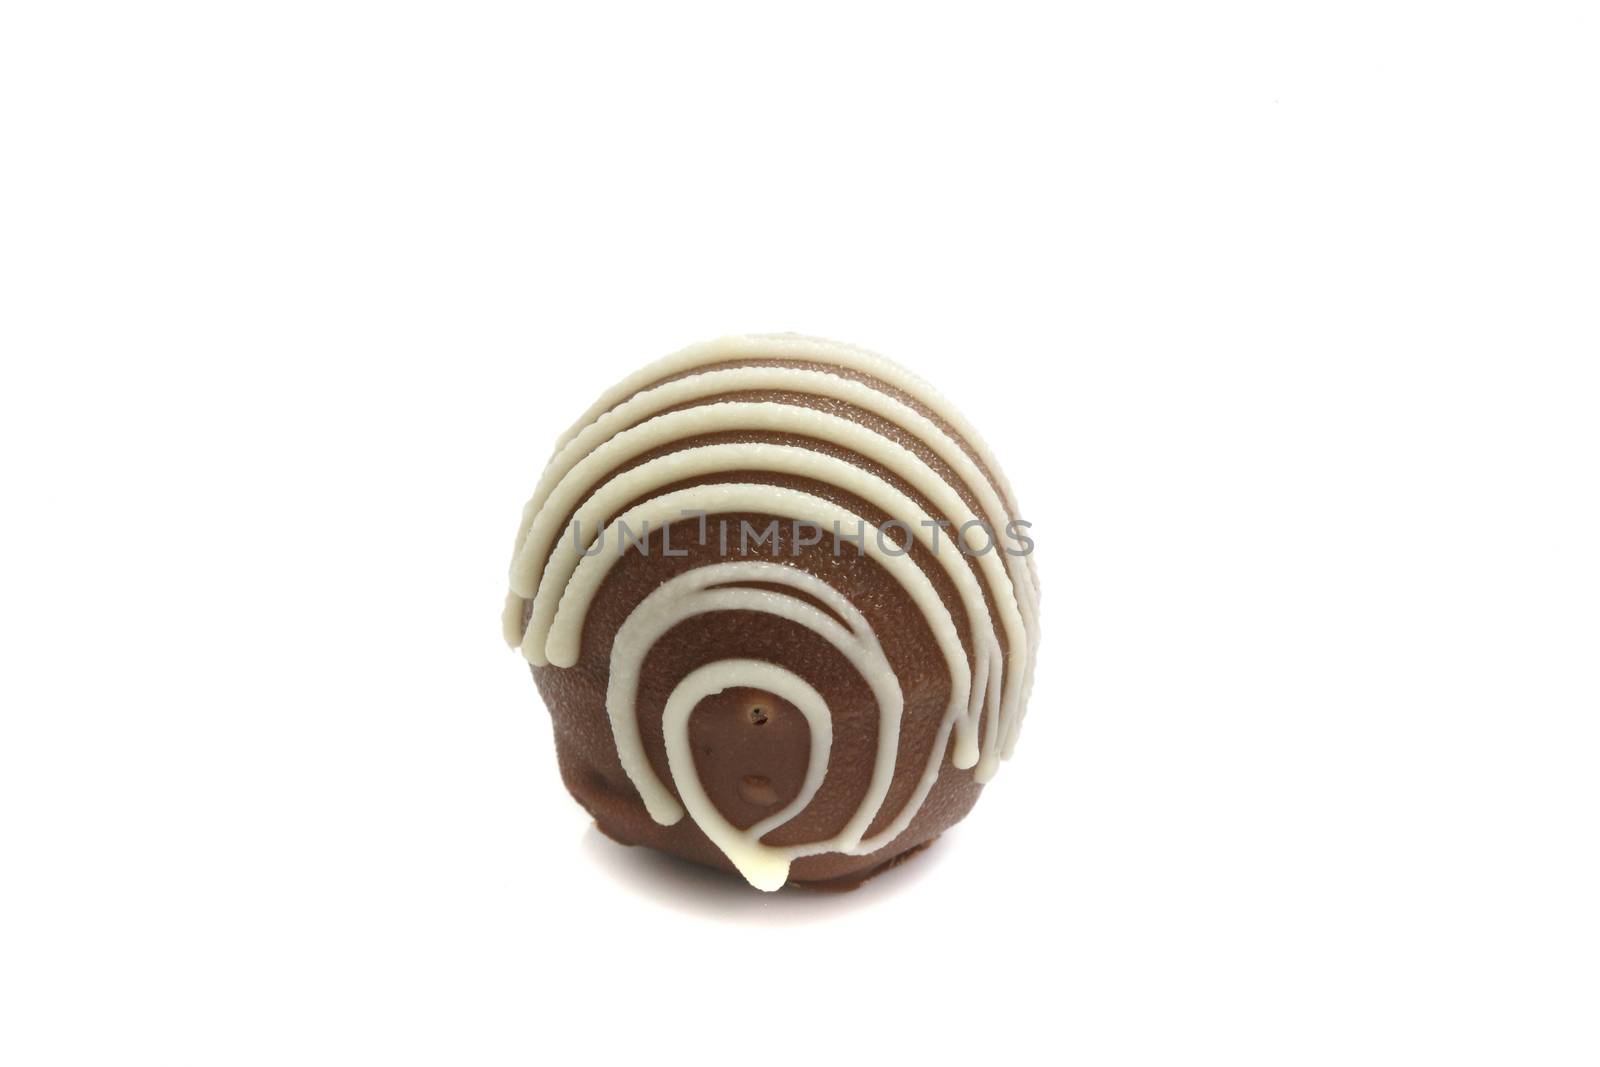 Chocolated cup isolated in white background